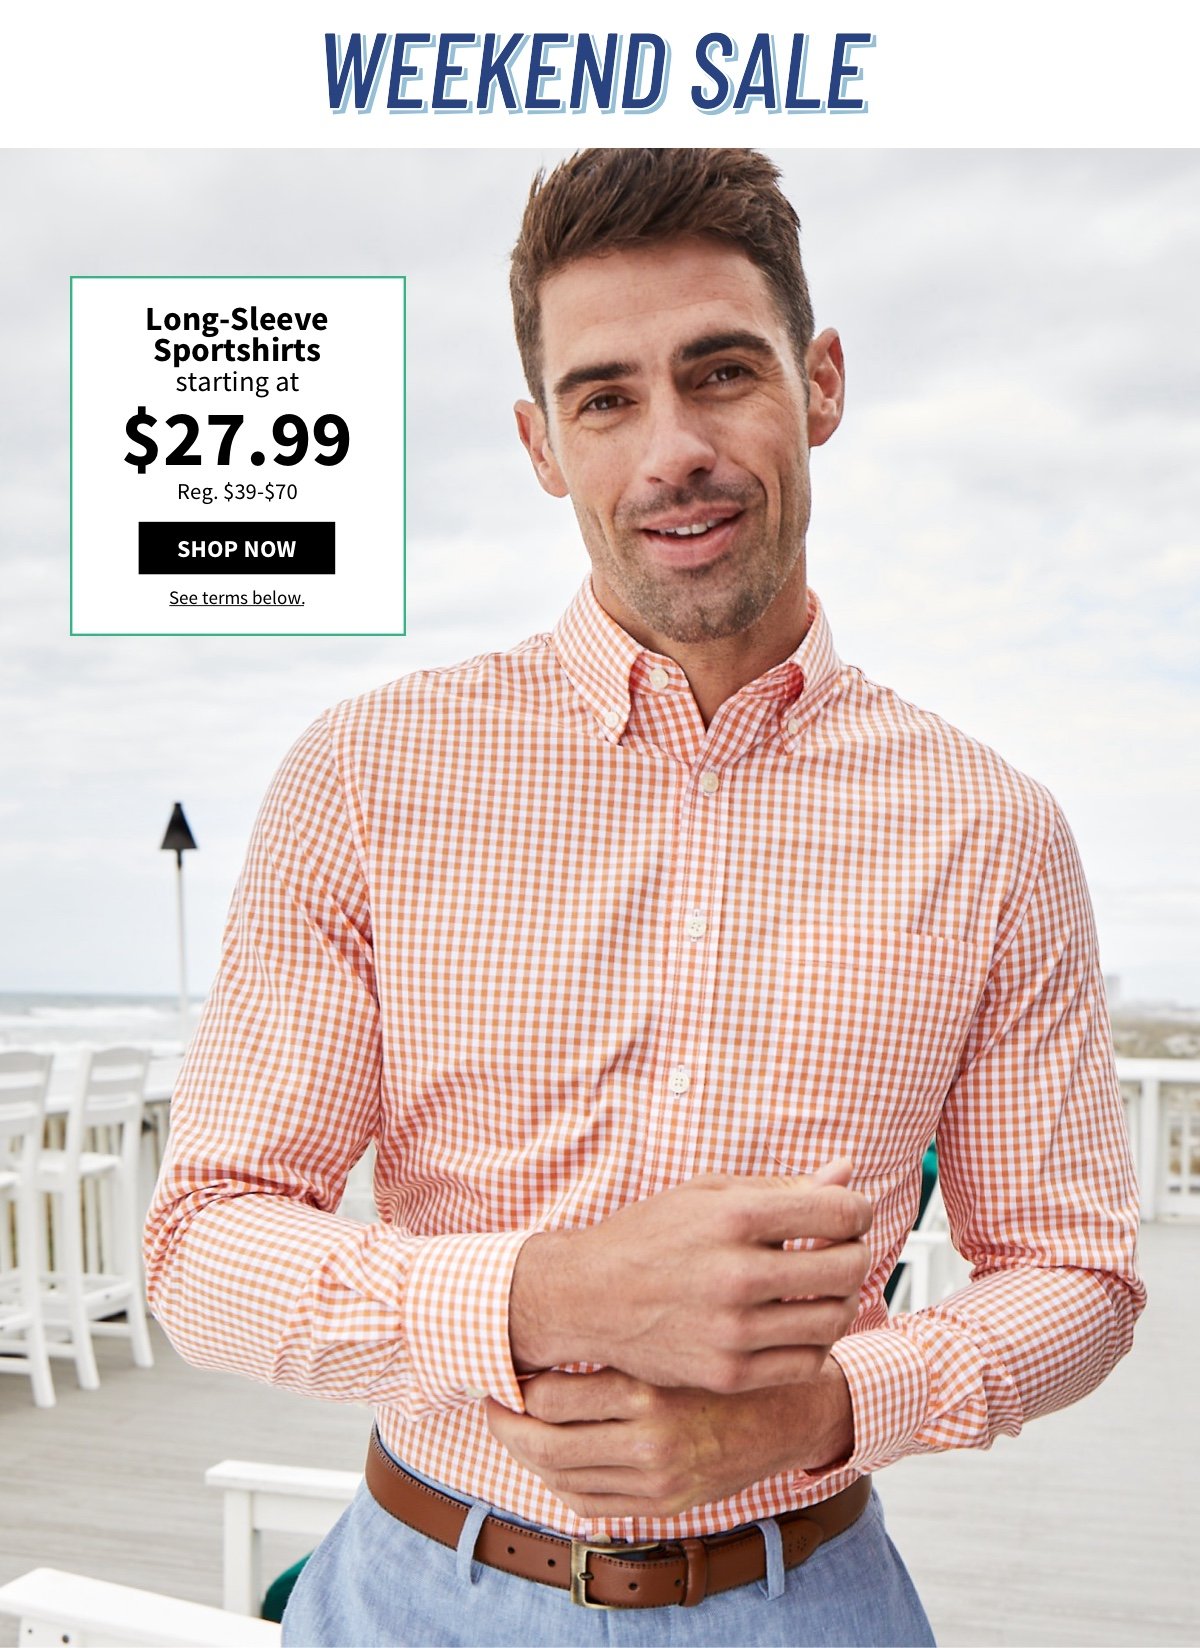 Shop Long-sleeve Sportshirts starting at $27.99 during our Weekend Sale